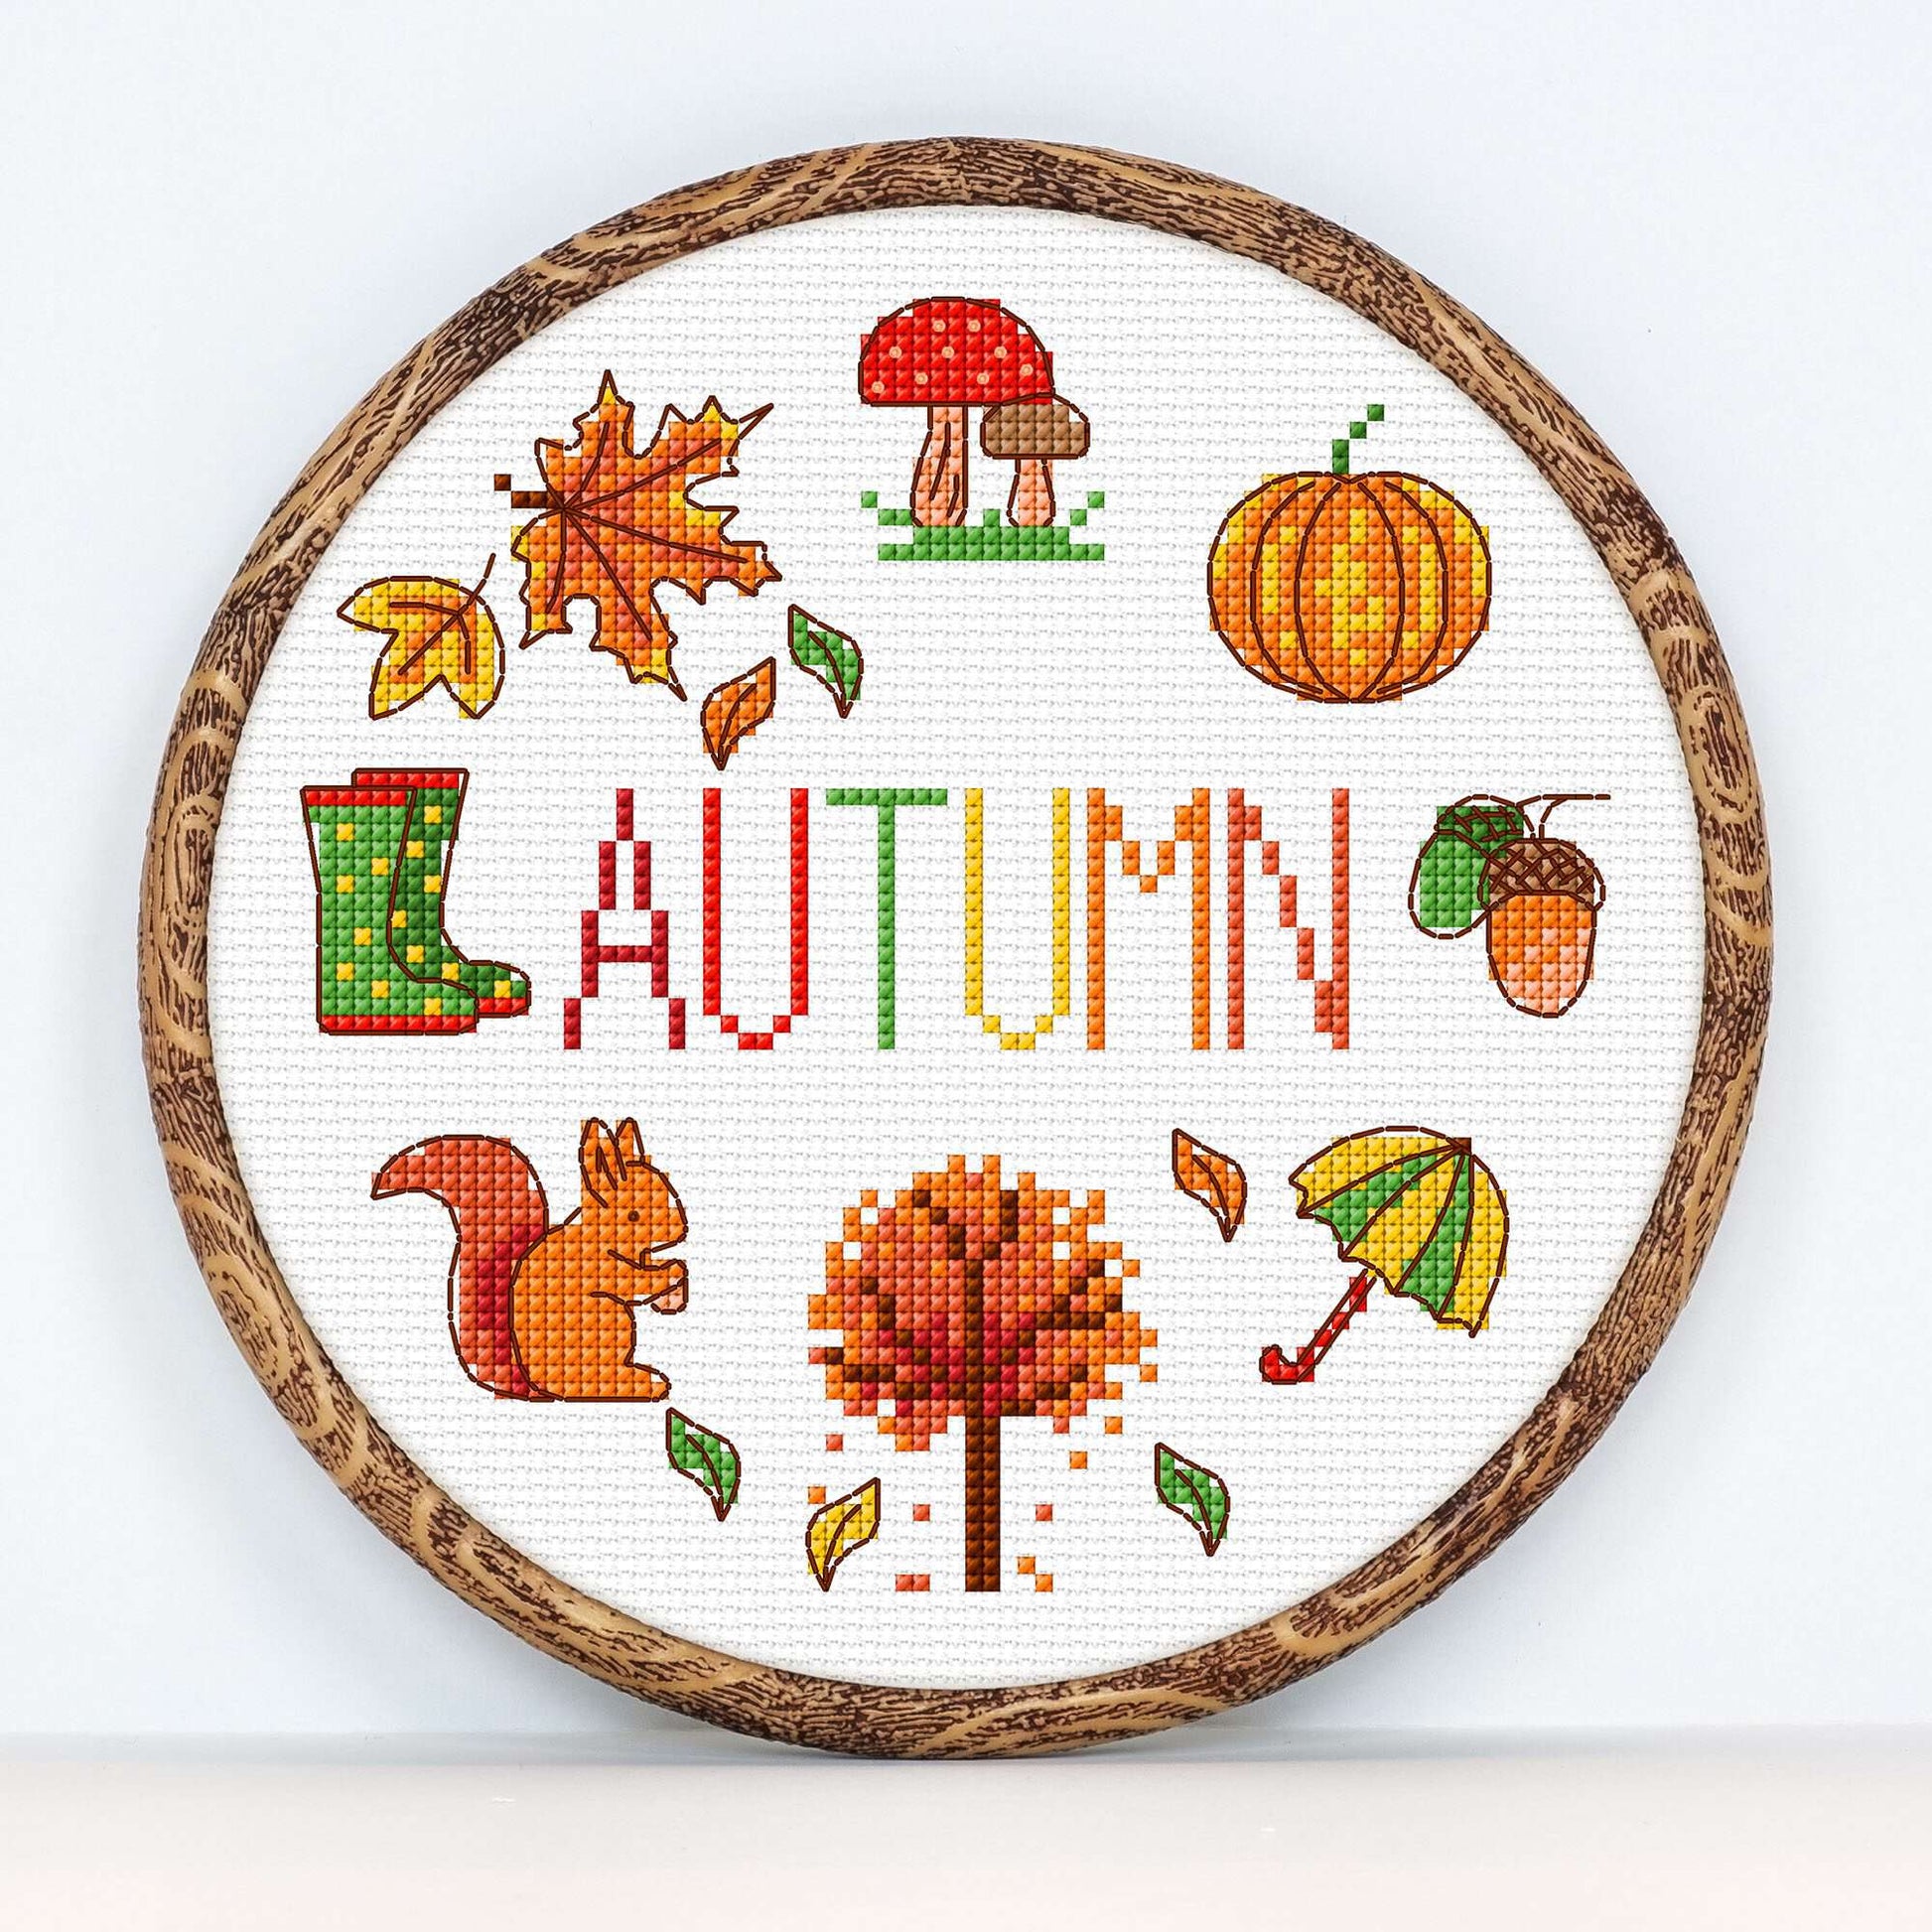 Free Anchor Embroidery Four Seasons - Autumn Cross Stitch Design Pattern